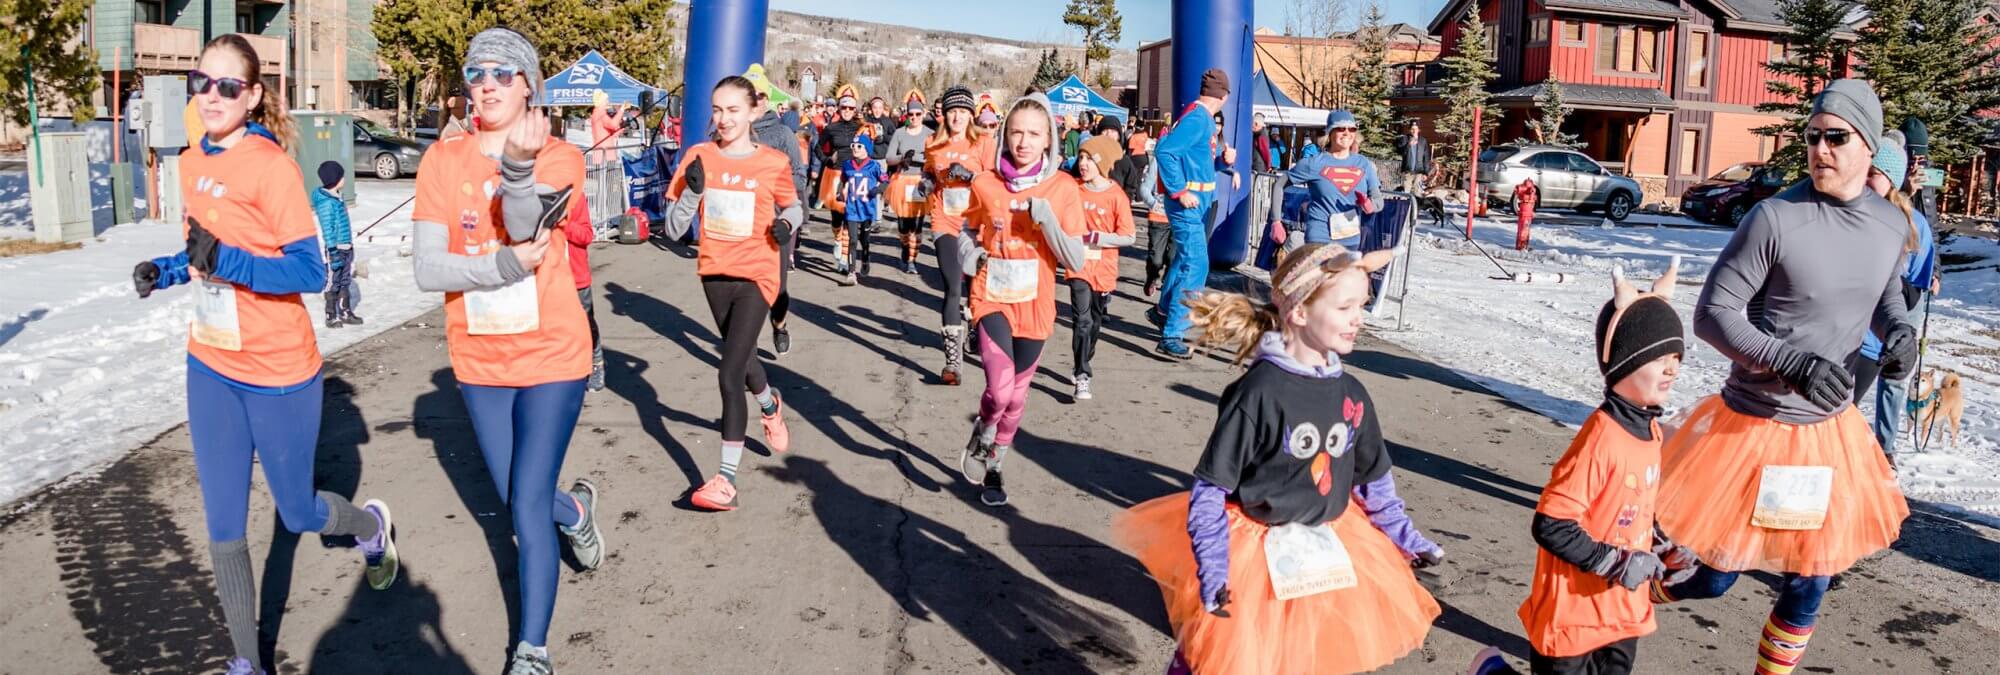 Men, women, and children dressed in orange as they run down a street in Frisco, CO for the Turkey Day 5K